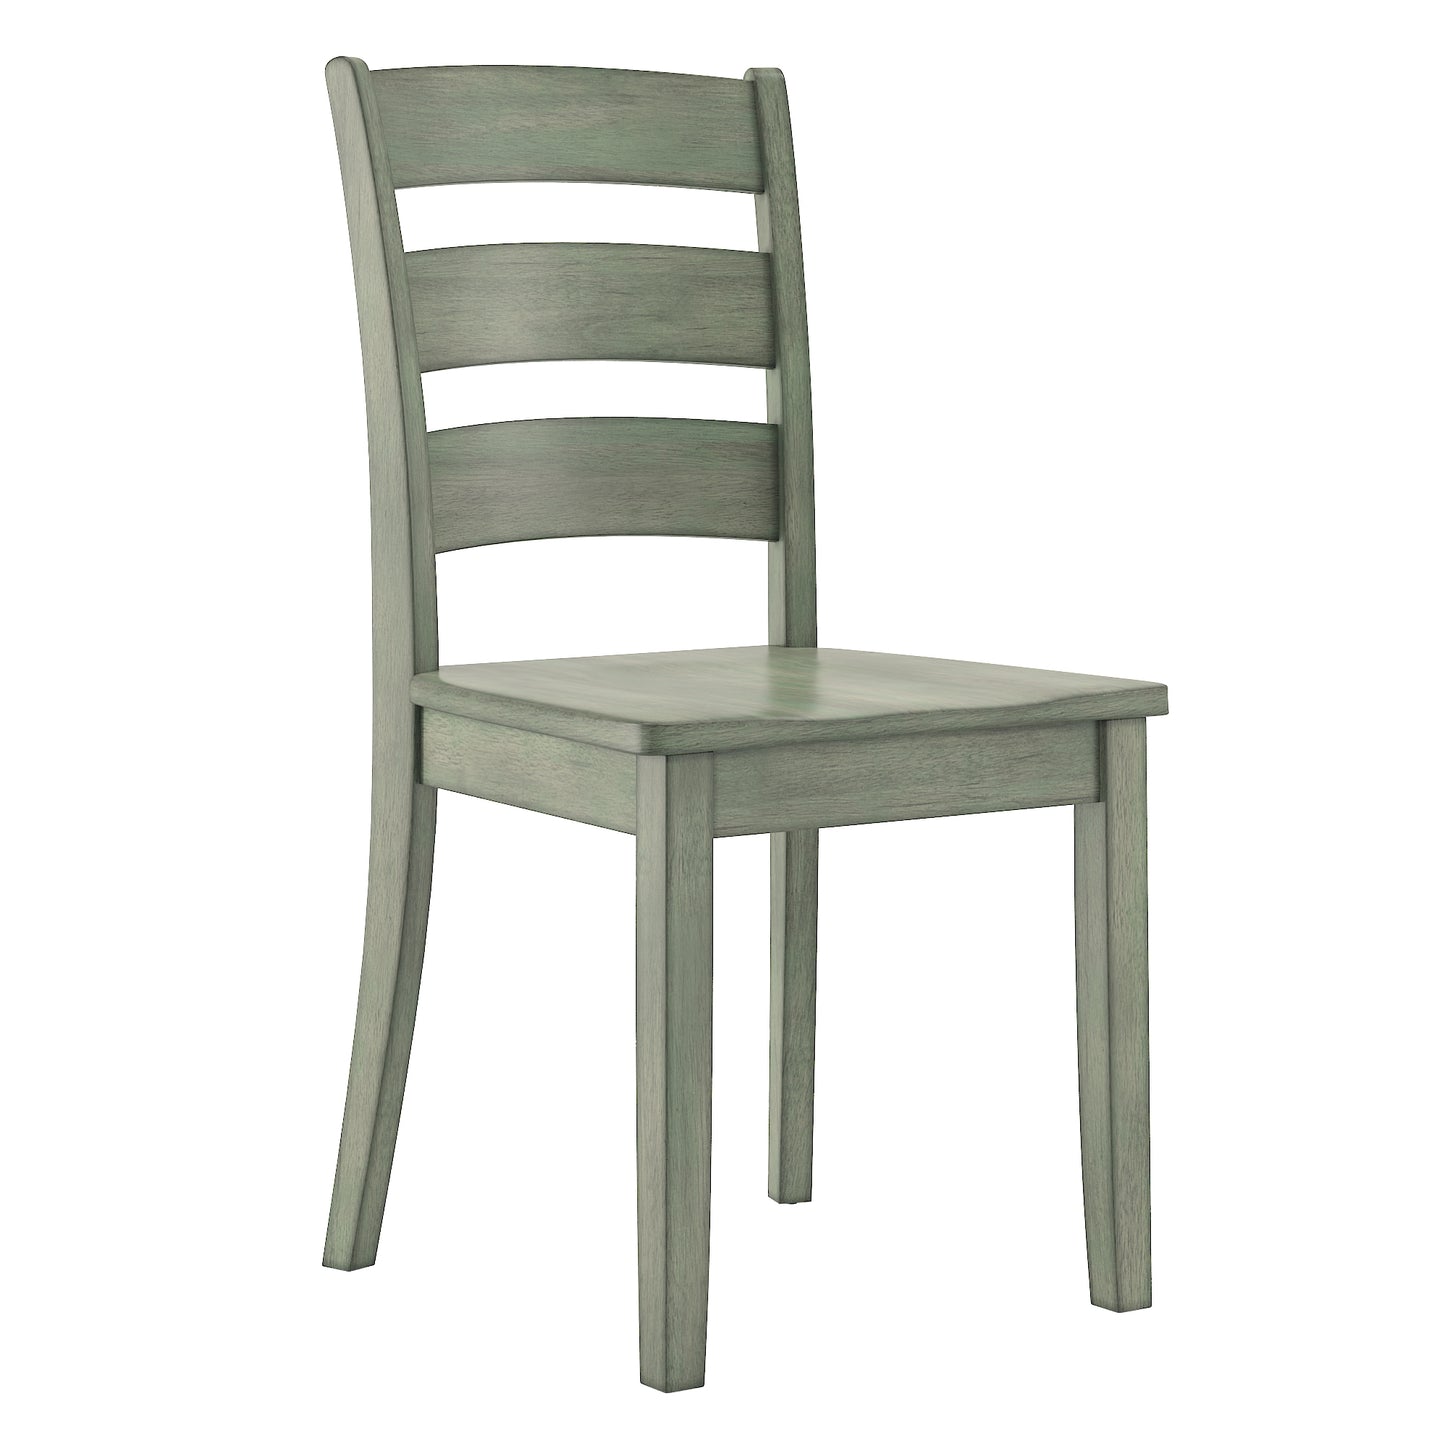 Ladder Back Wood Dining Chairs (Set of 2) - Antique Sage Finish